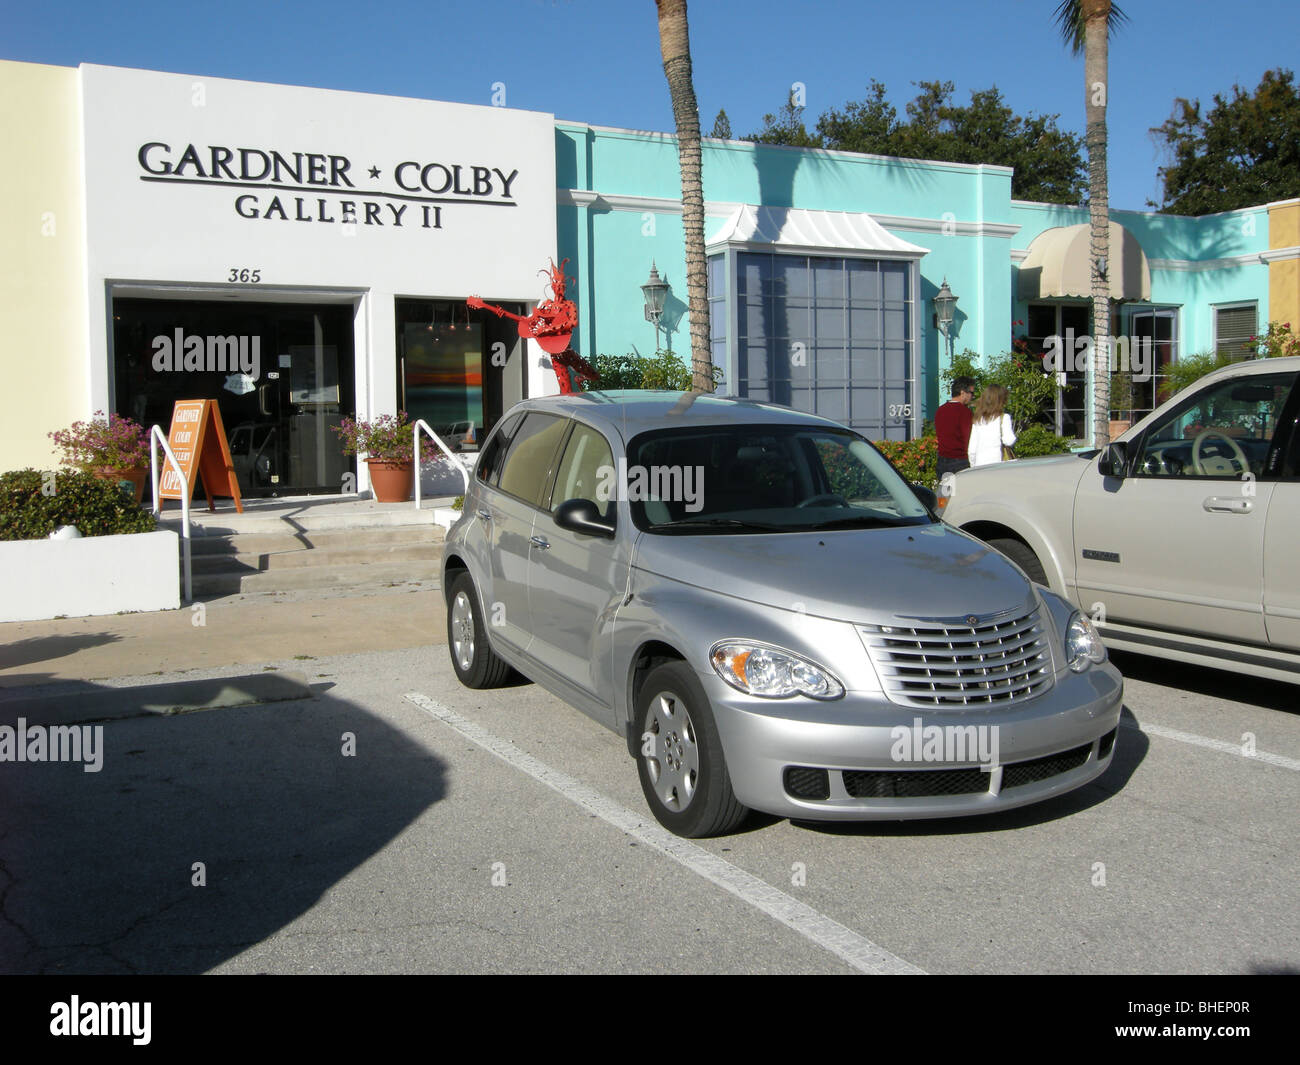 2009  Chrysler Cruiser in front of the Gardner Colby Gallery in the historic district of Naples Florida USA Stock Photo